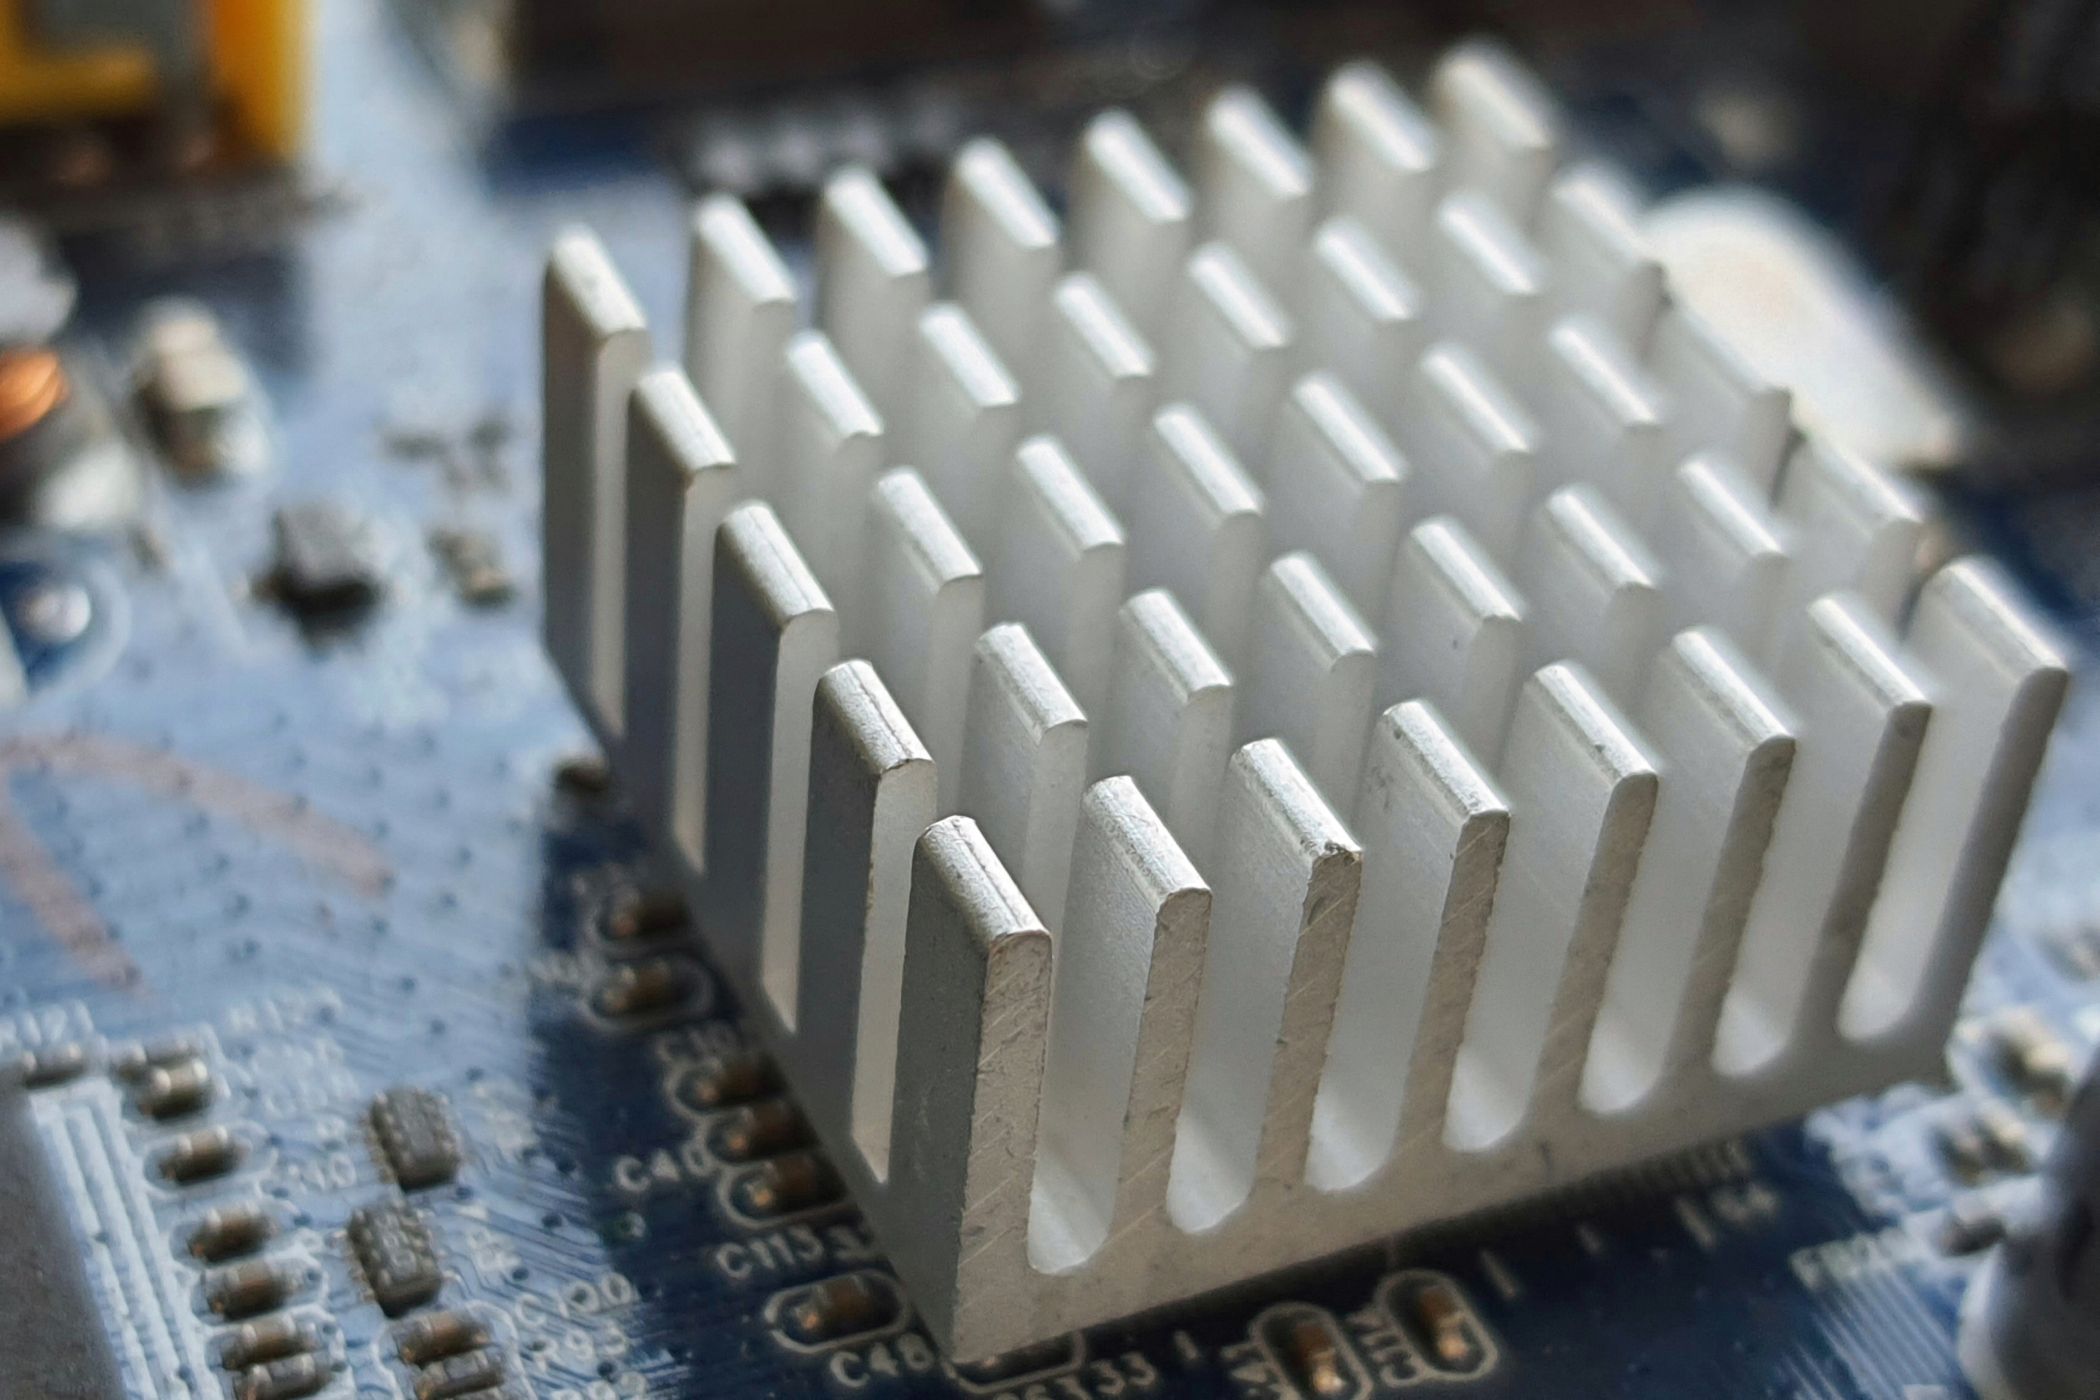 A close-up image of an aluminum heatsink mounted on a motherboard.